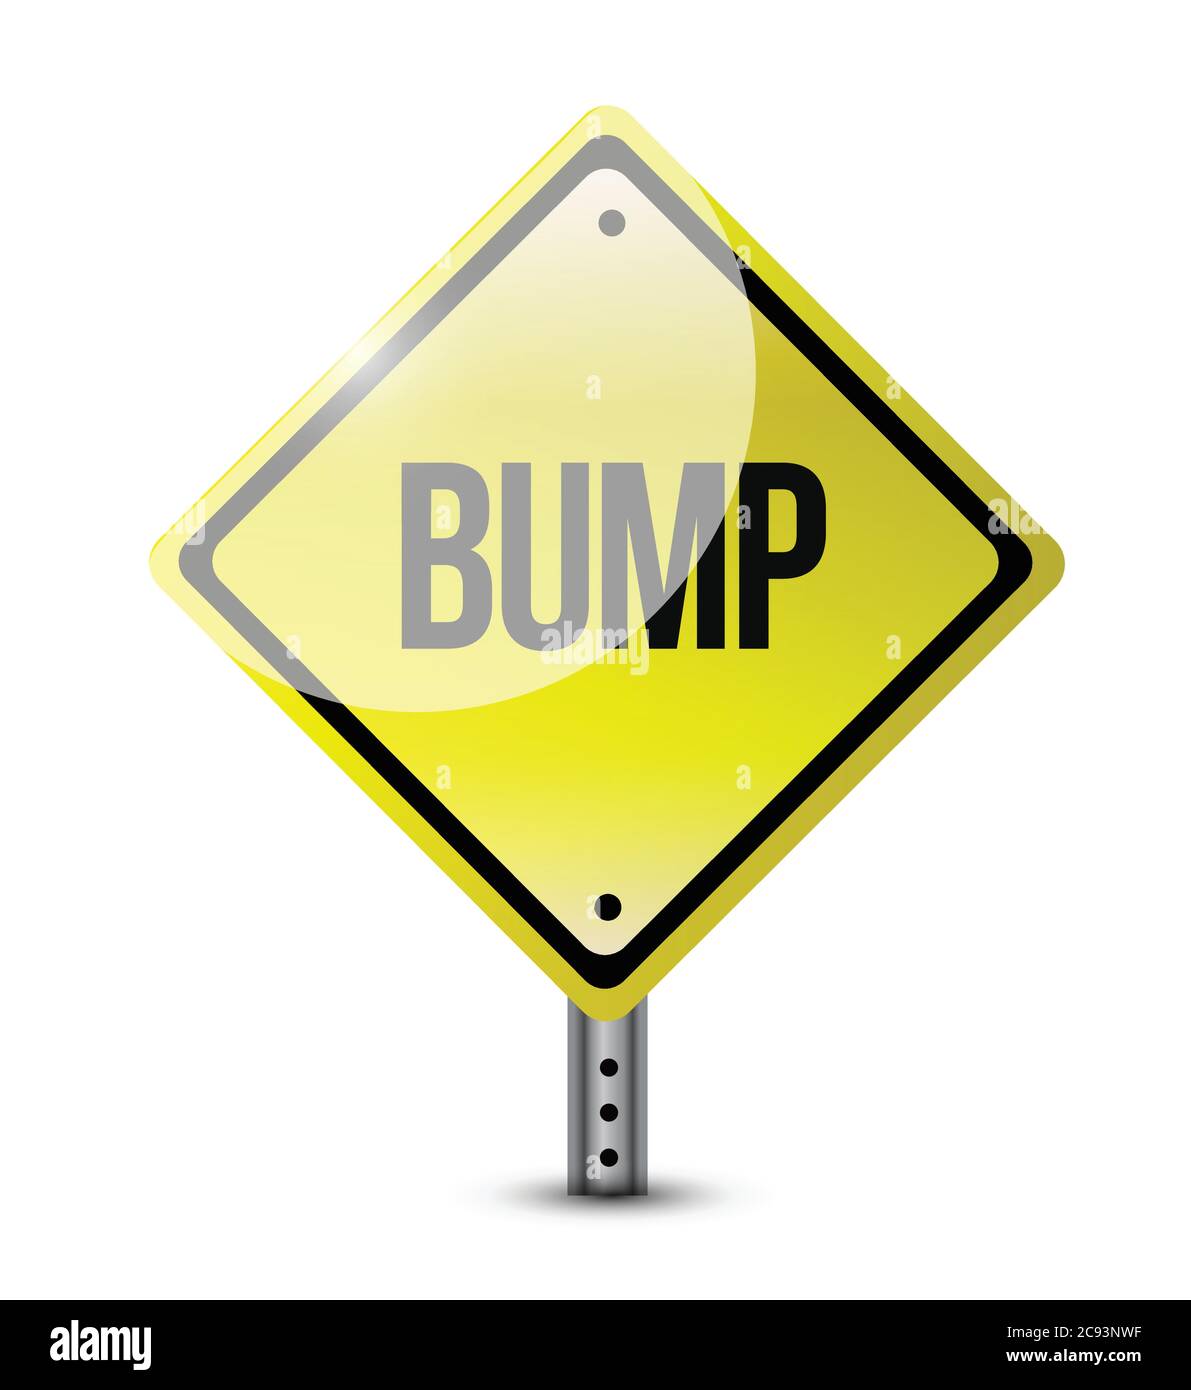 Bump yellow sign illustration design over a white background Stock Vector